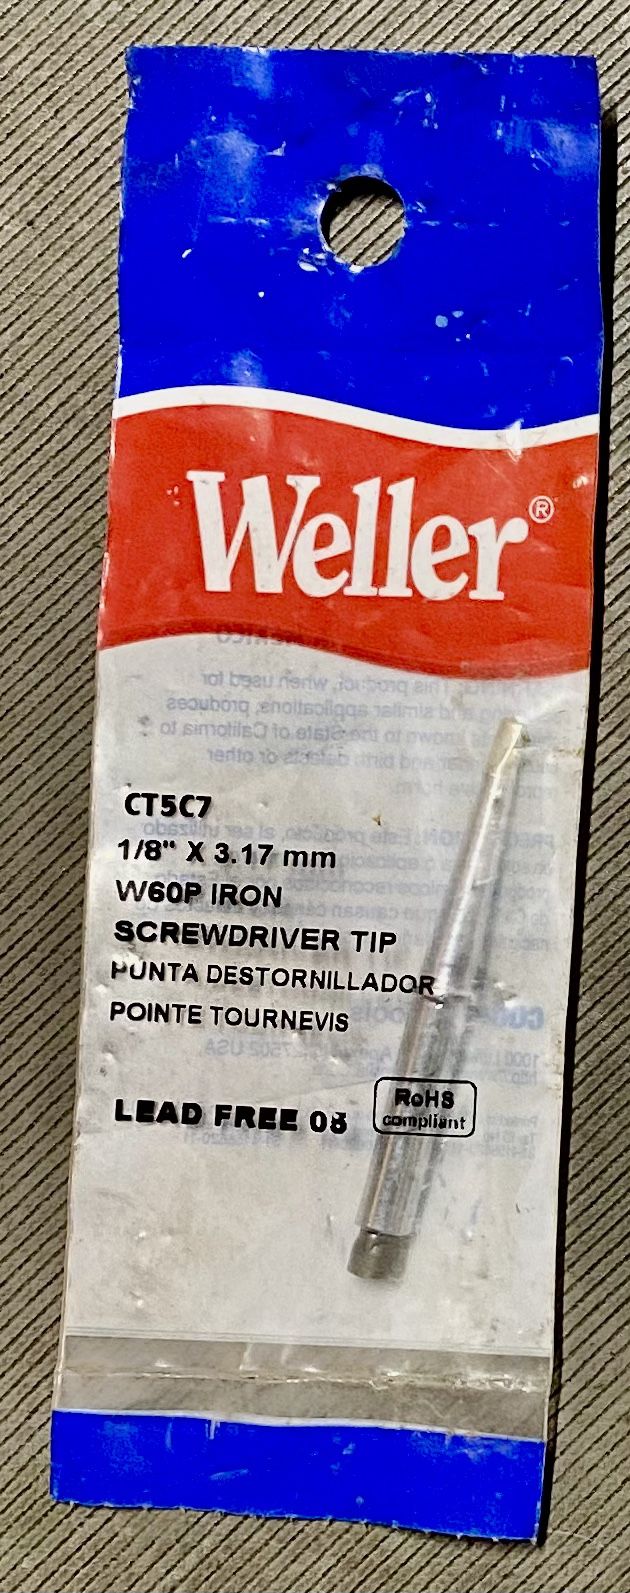 Weller CT5C7 700 degree Screwdriver Solder Tip for W60P Irons